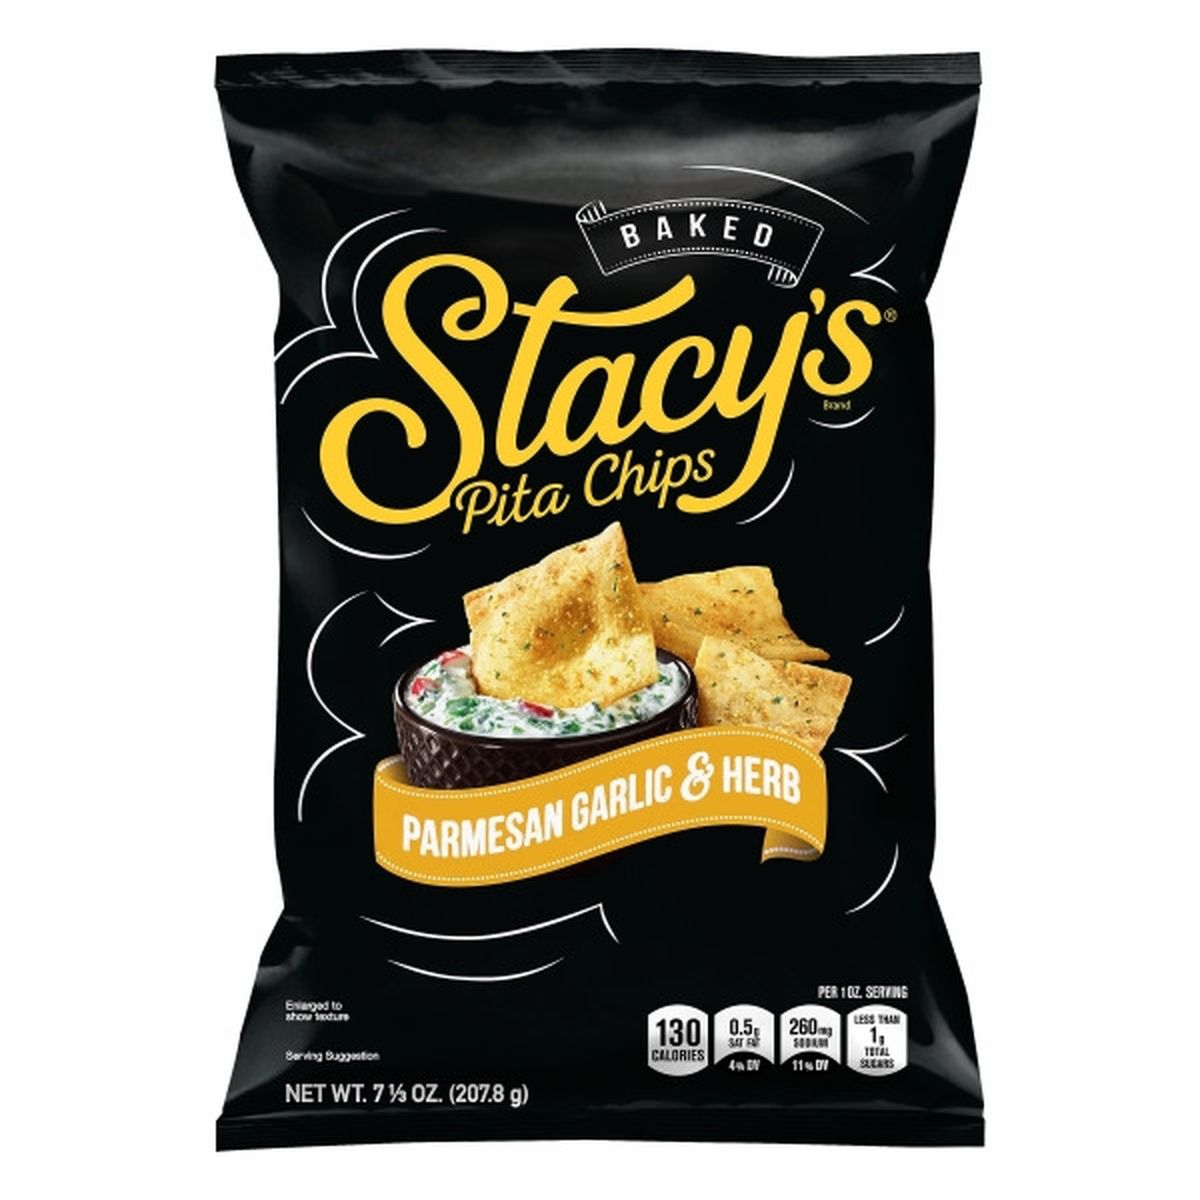 Calories in Stacy's Pita Chips, Parmesan Garlic & Herb, Baked